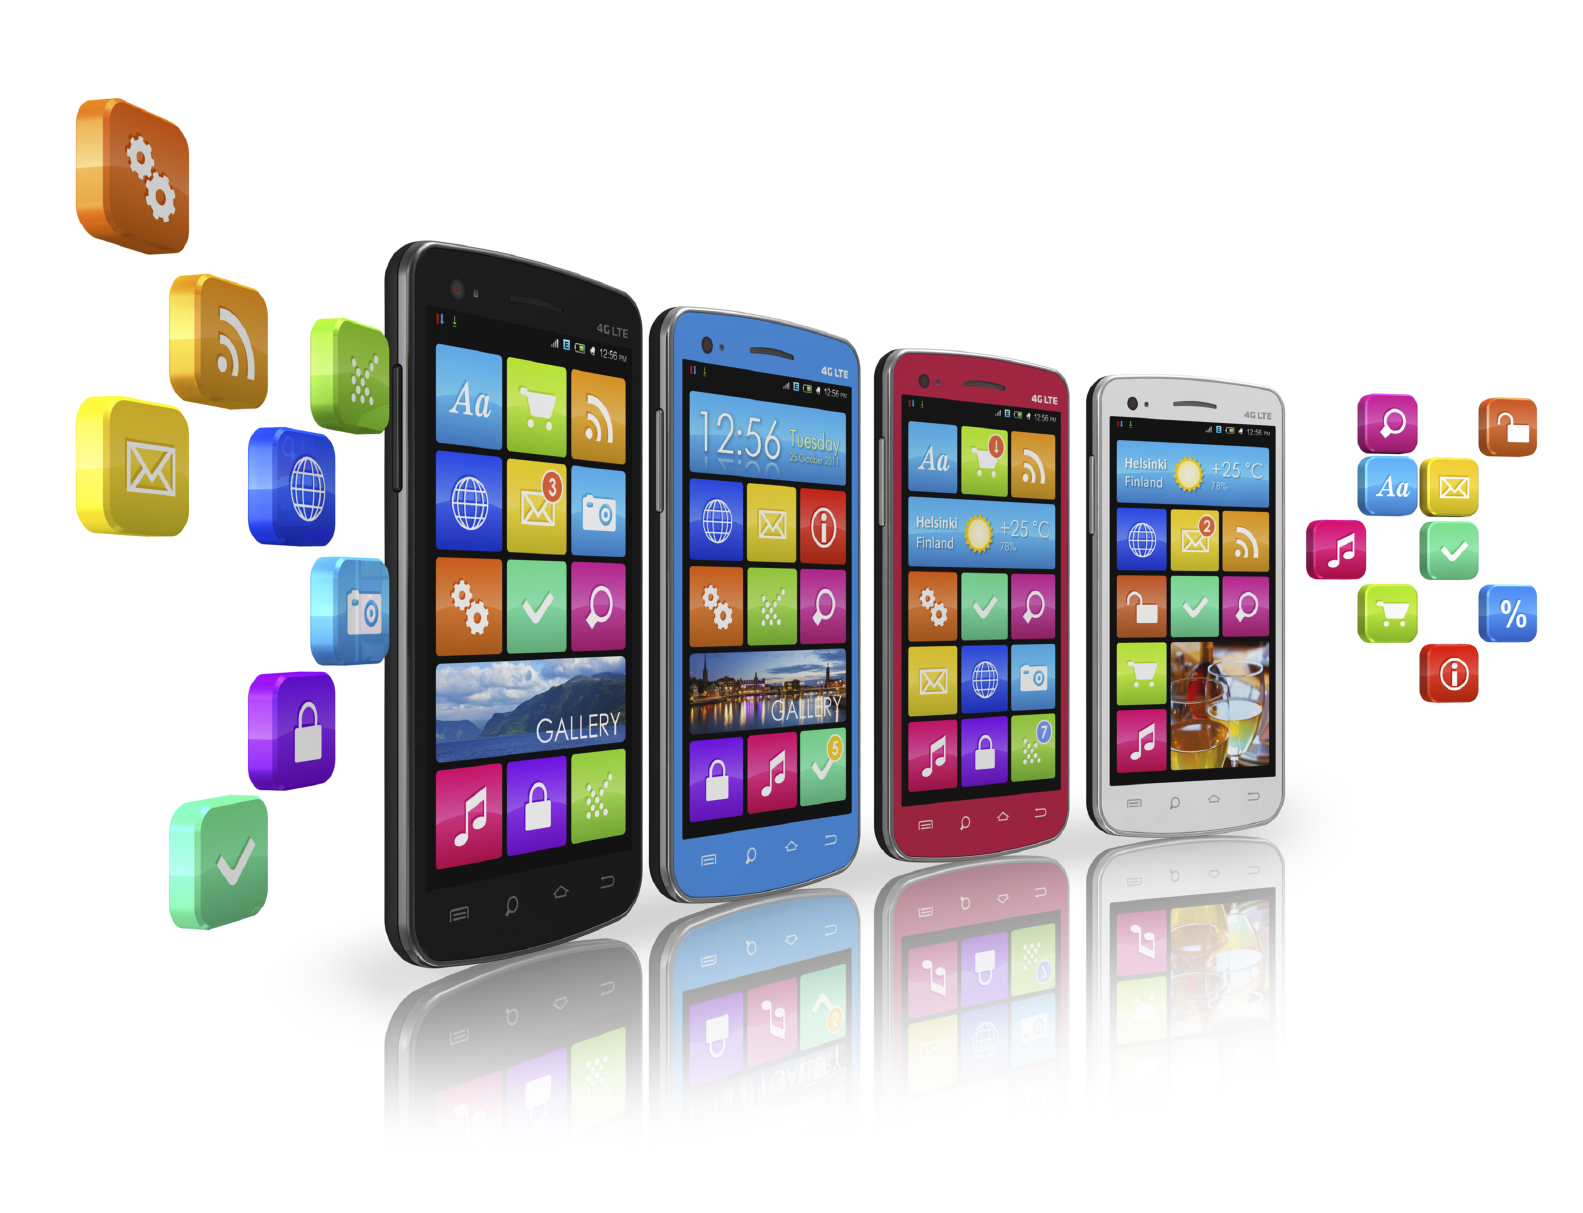 The New Generation of Information Technology For Mobile Applications